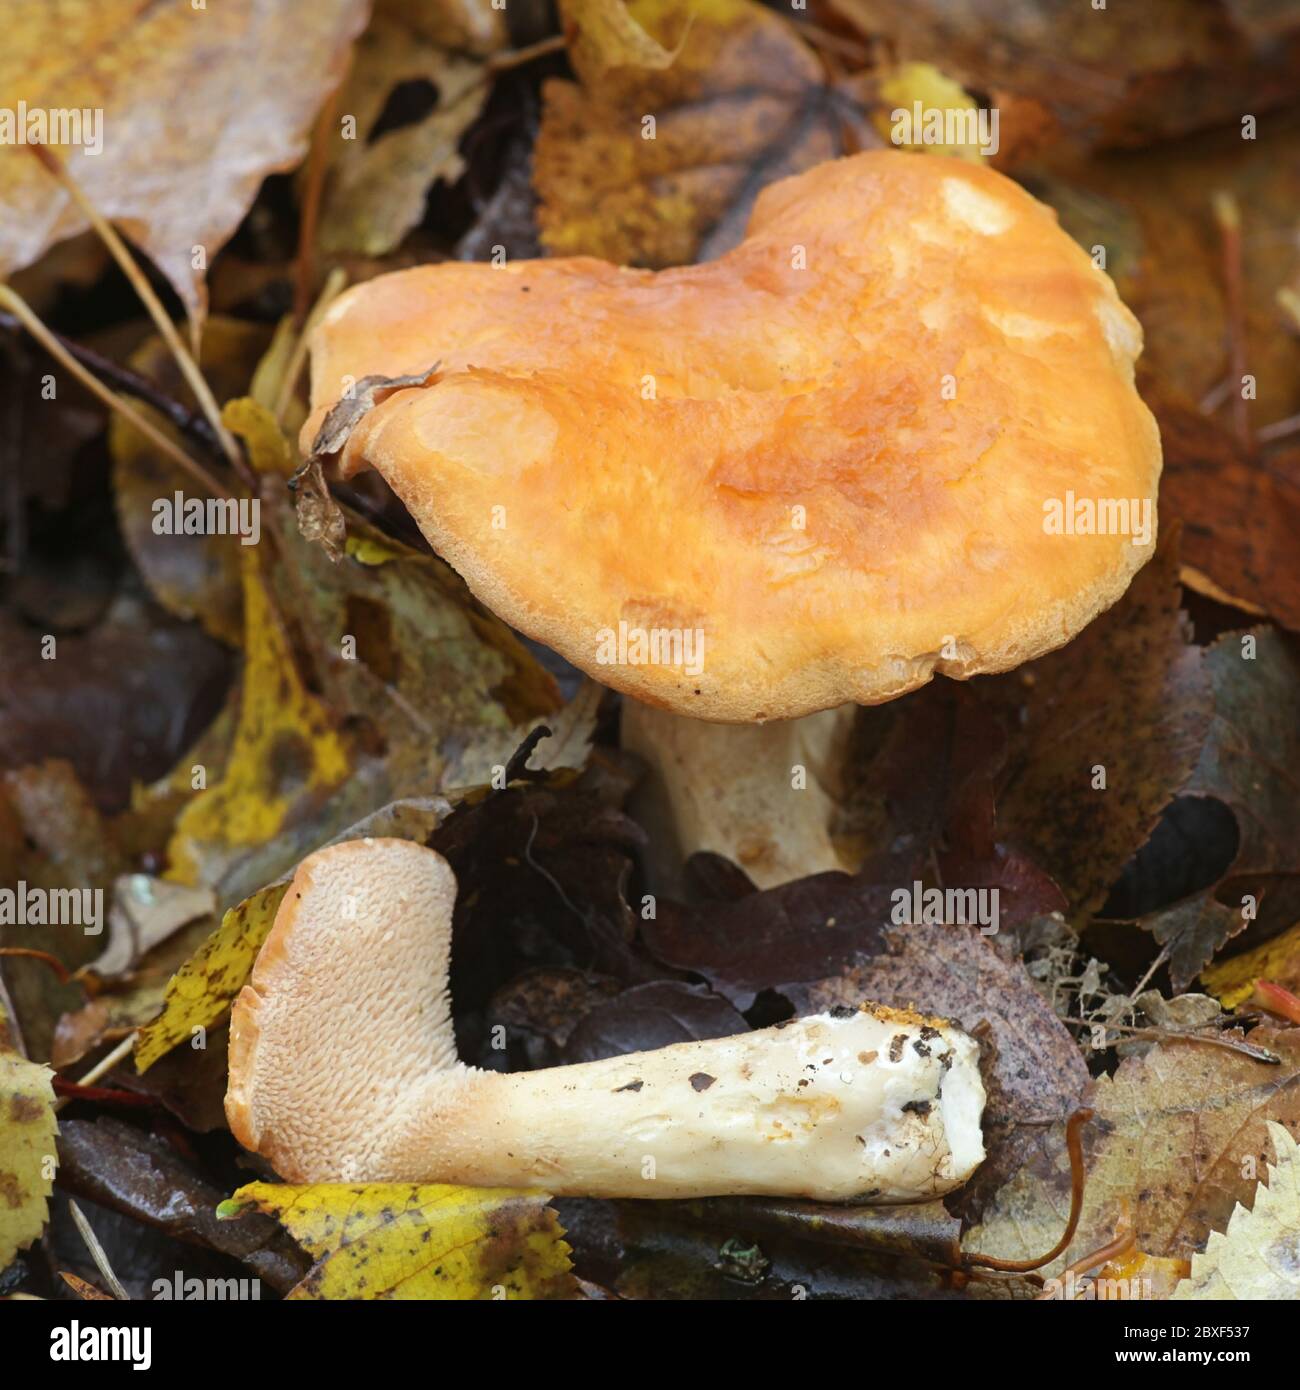 Hydnum rufescens (Hydnum rufescens coll.), commonly known as the terracotta hedgehog, wild mushroom from Finland Stock Photo